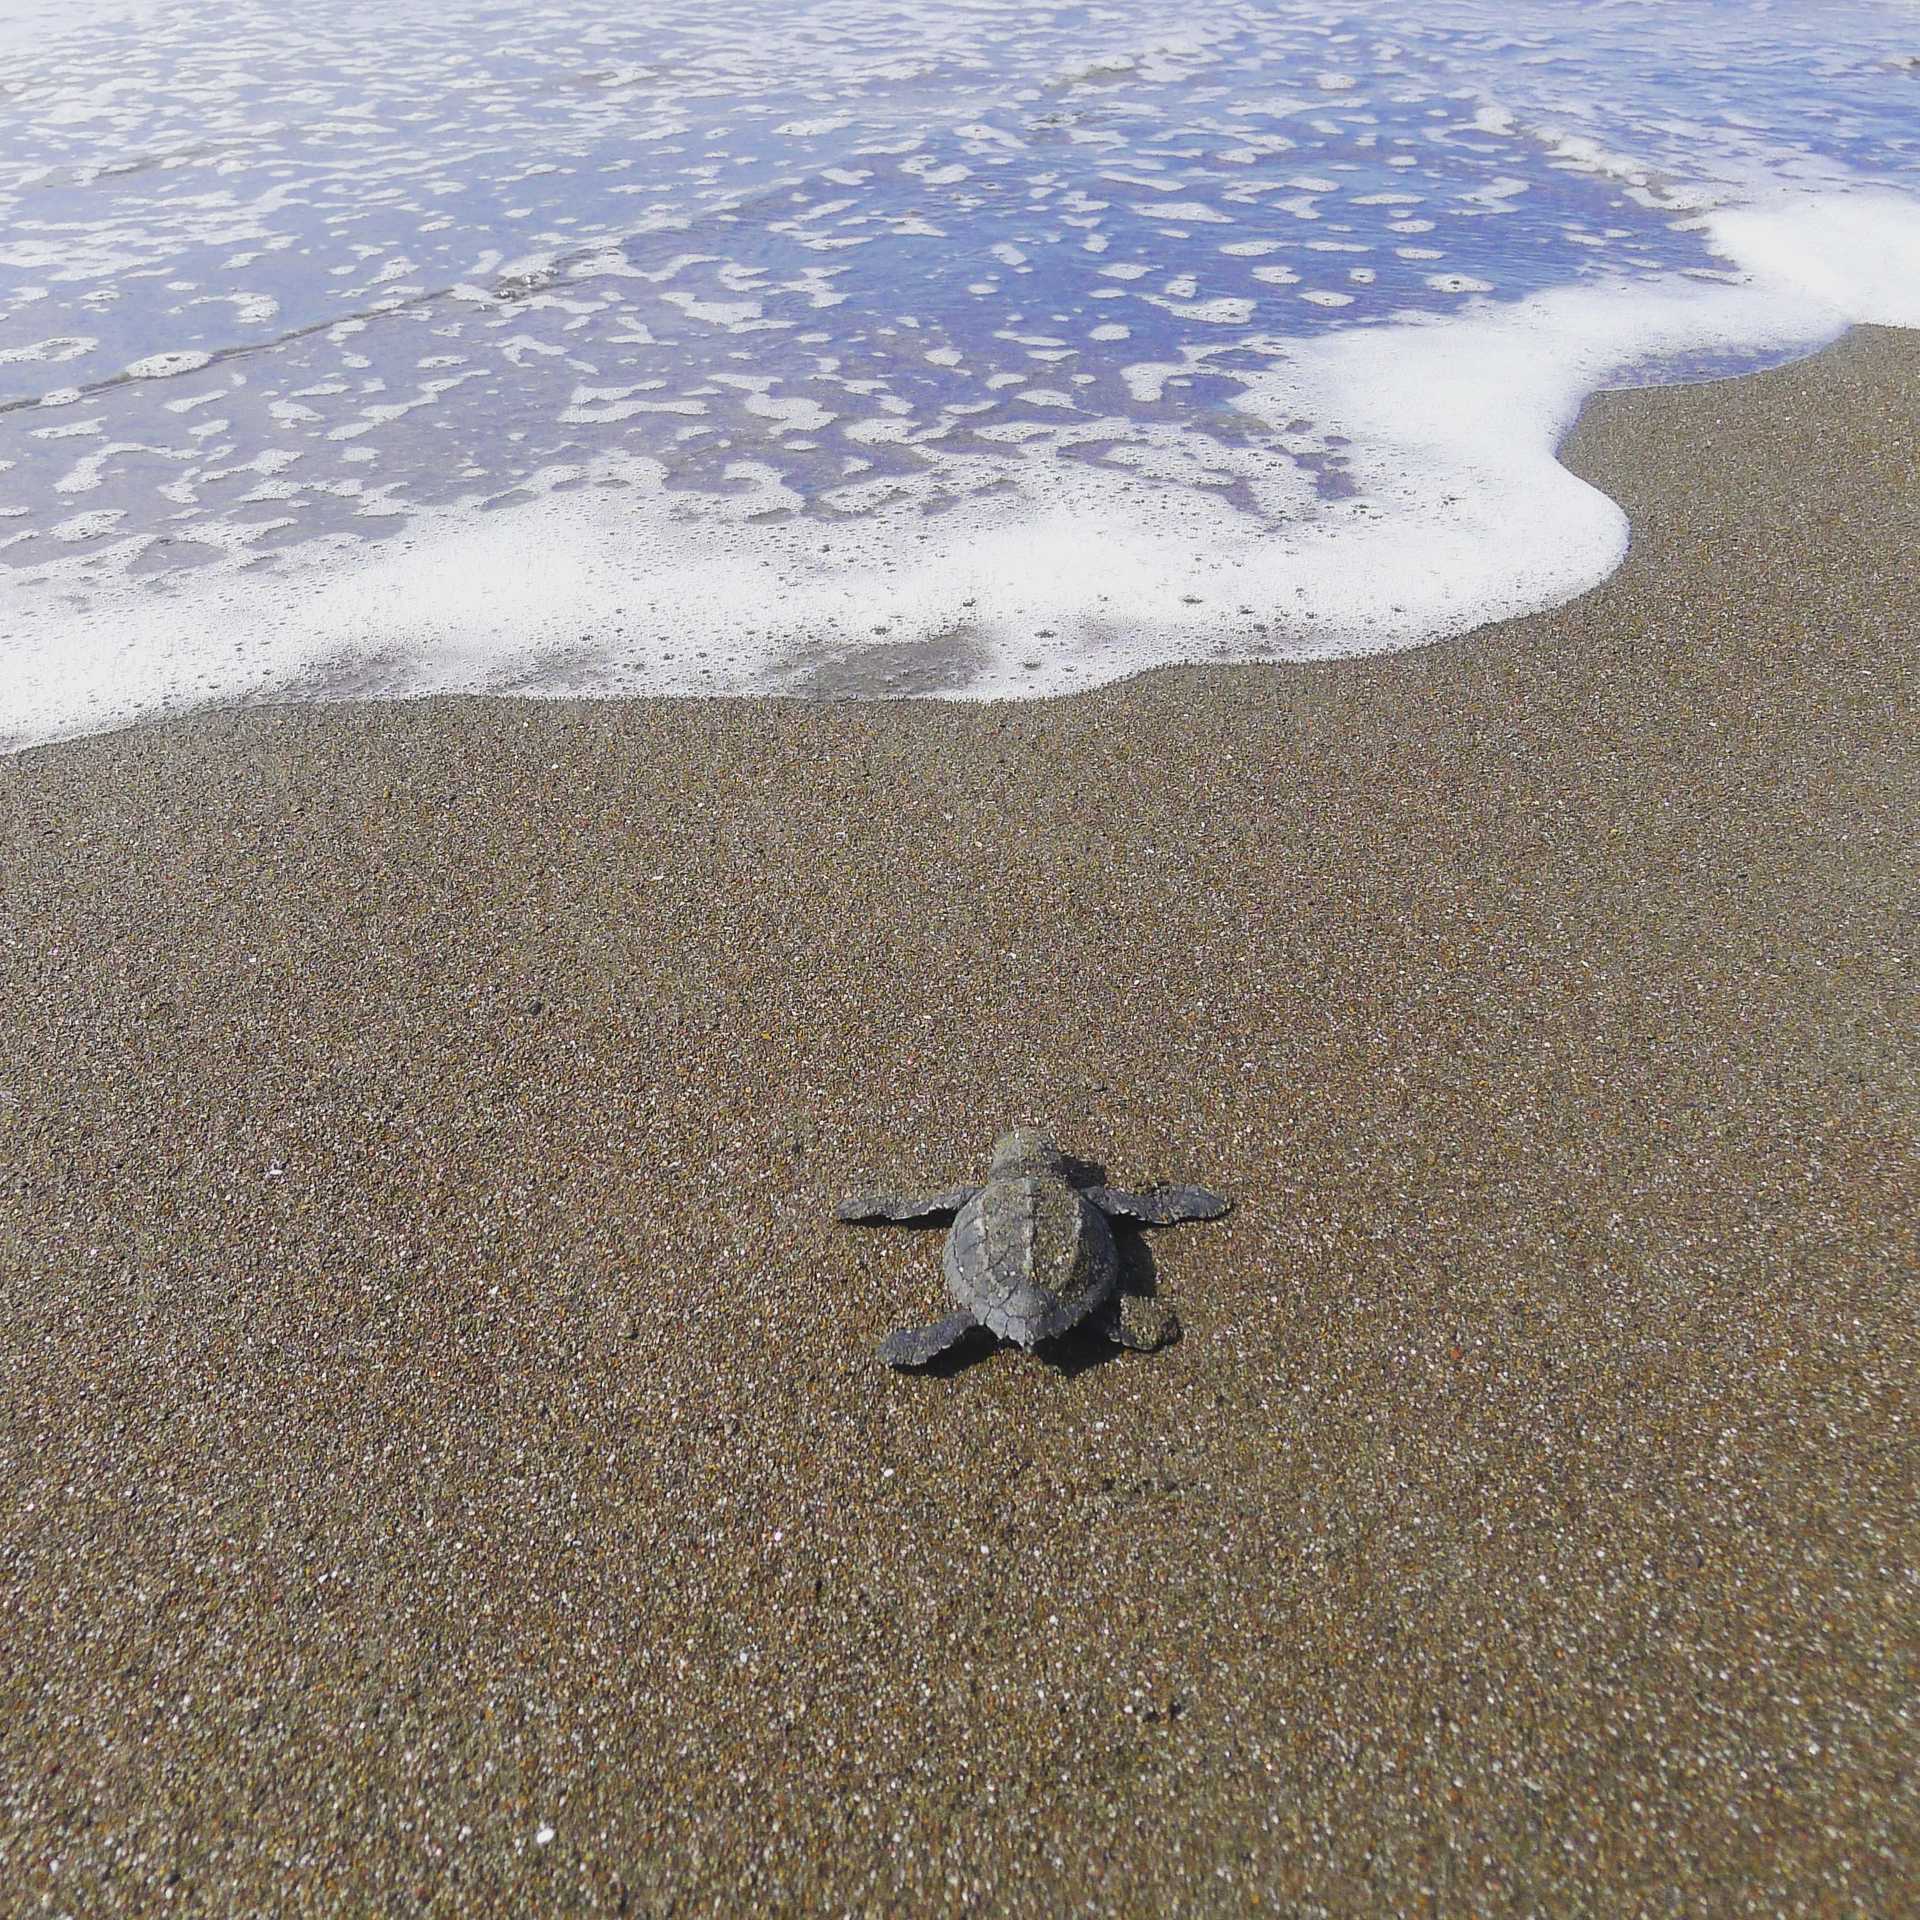 A baby turtle at the beach